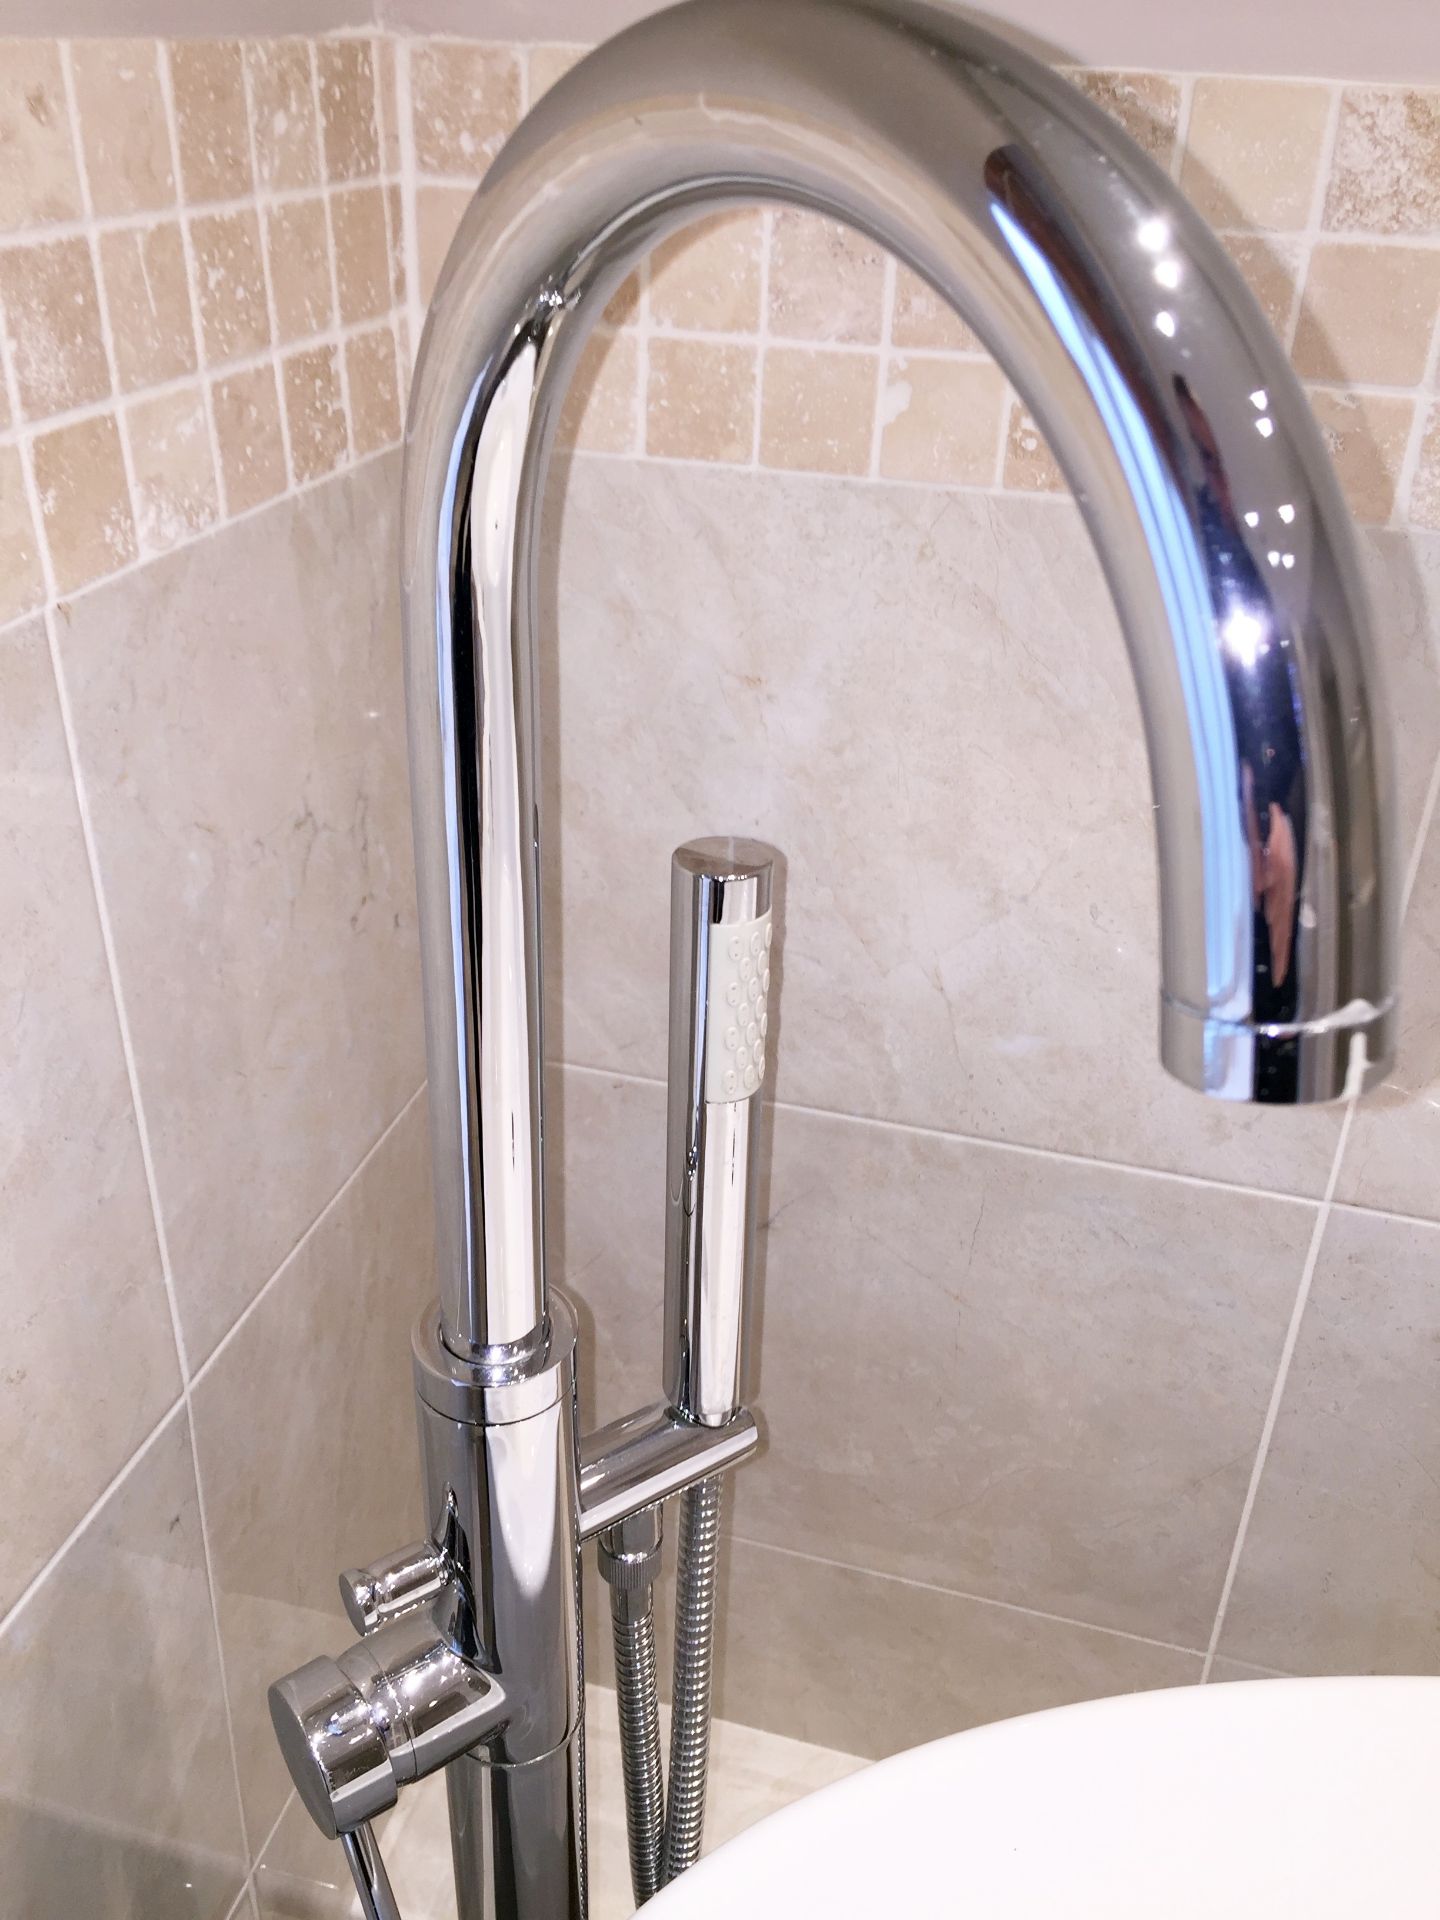 1 x Bath With A Floor Mounted Bath Filler Tap - Preowned In Good Condition - More Information To - Image 5 of 8